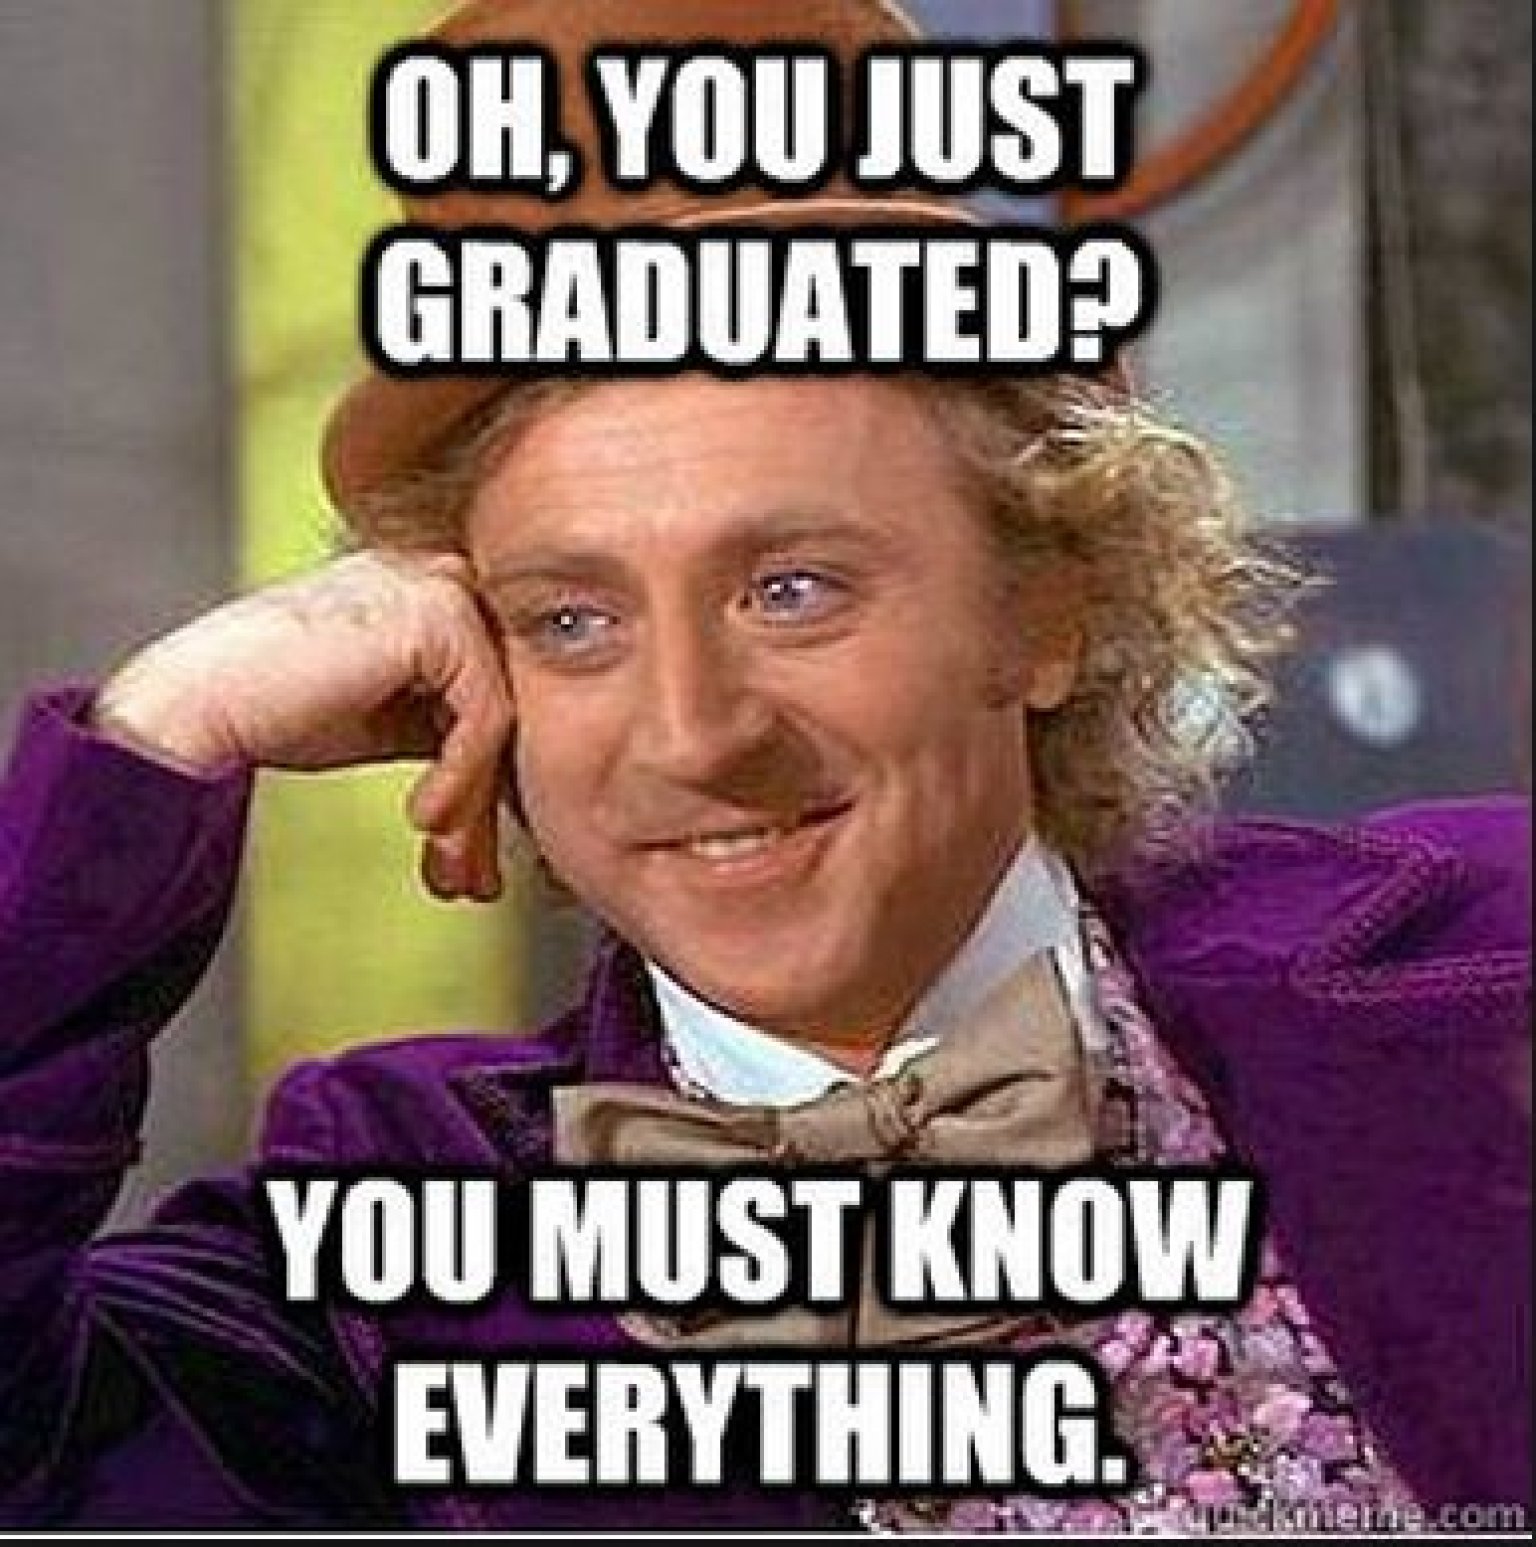 Top 20 Funniest Graduation Quotes Home, Family, Style and Art Ideas